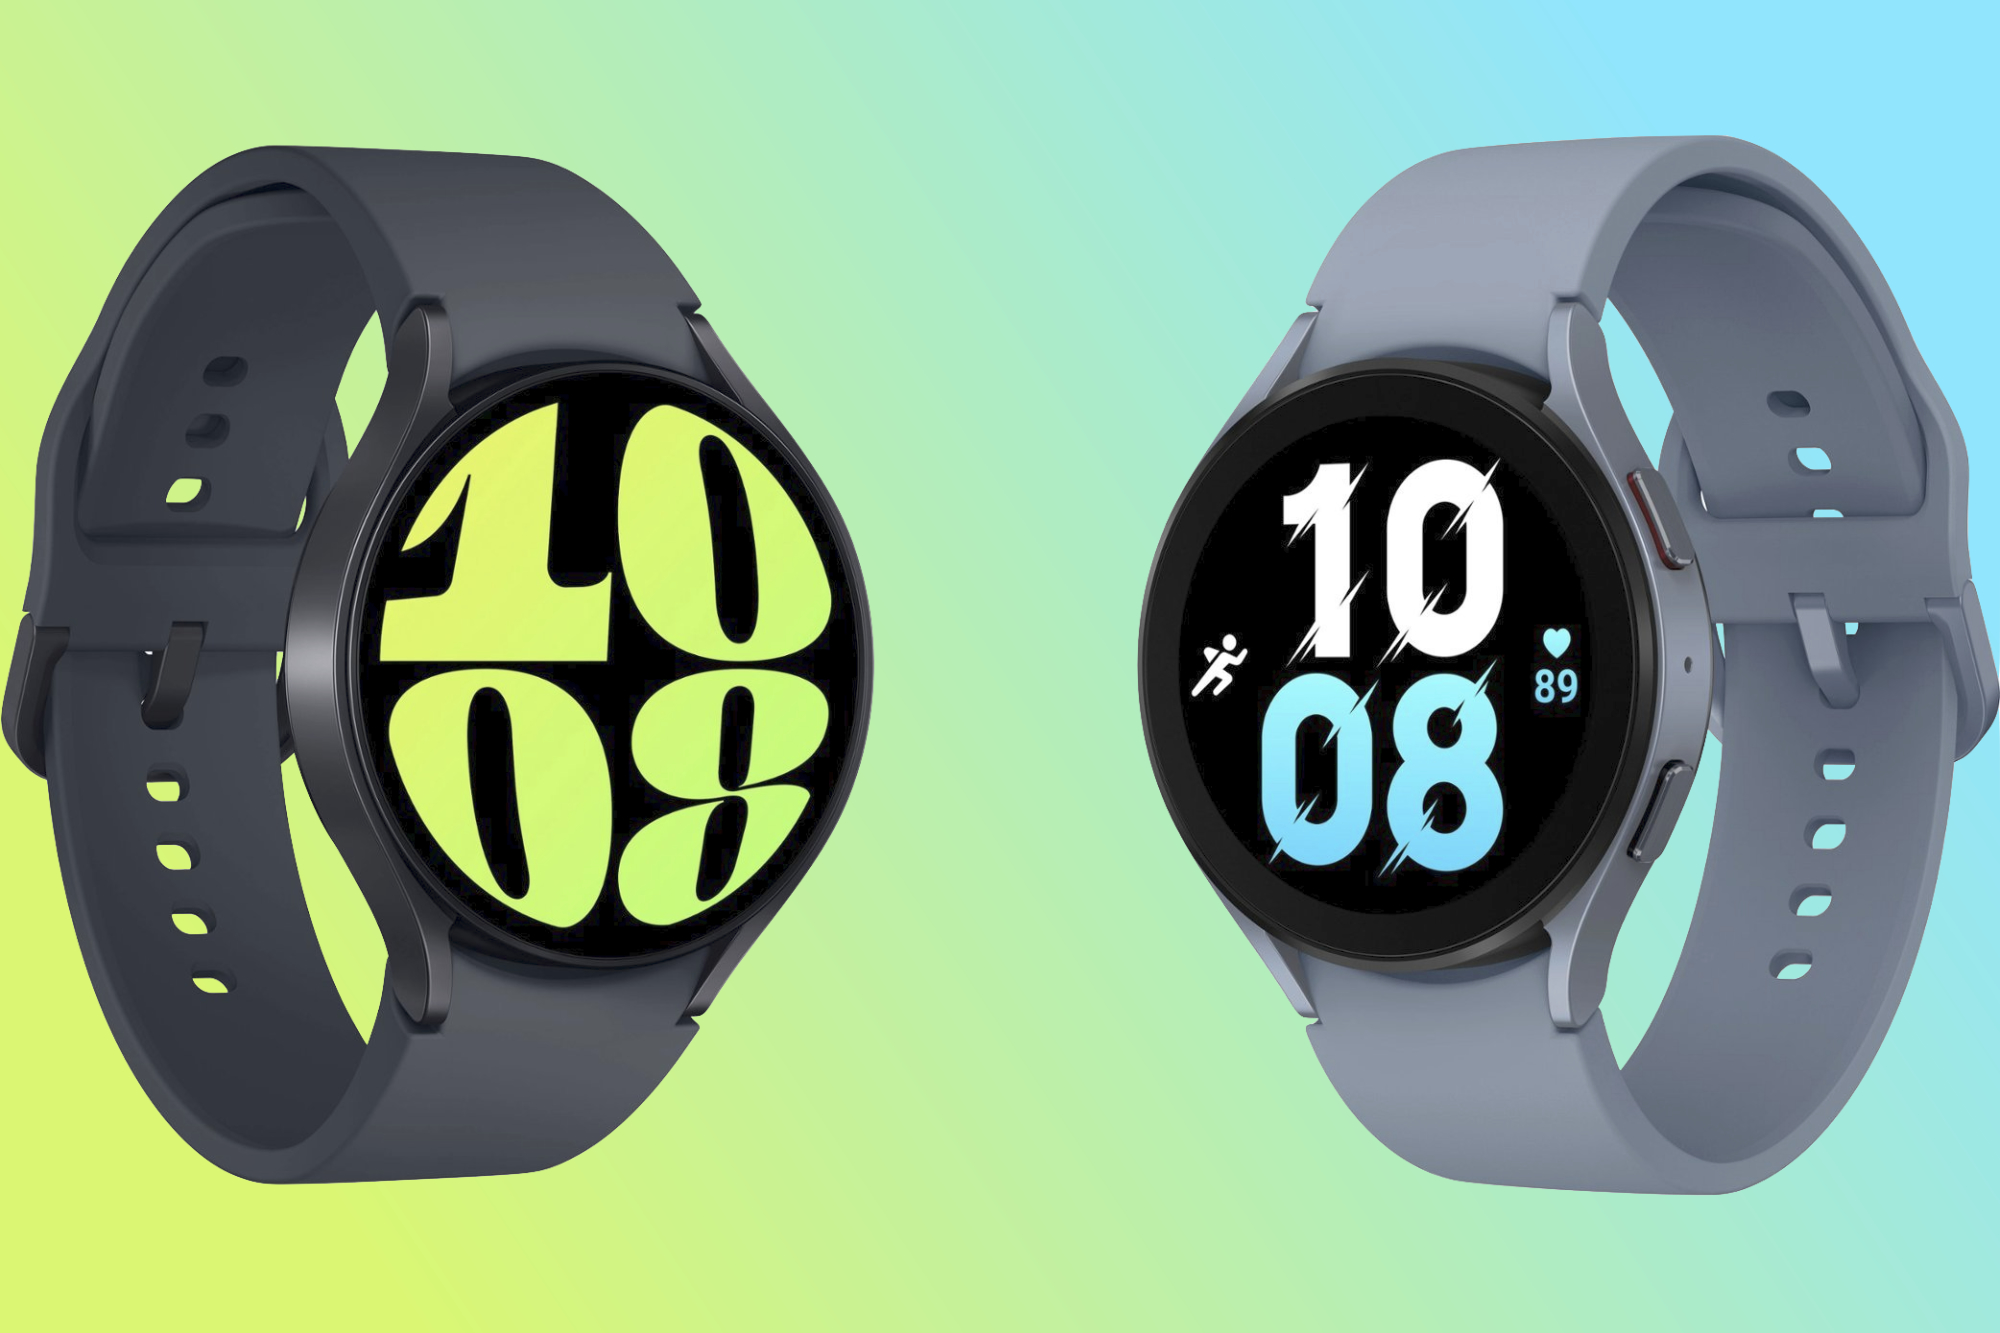 Six smartwatches from brands taking on Apple and Samsung